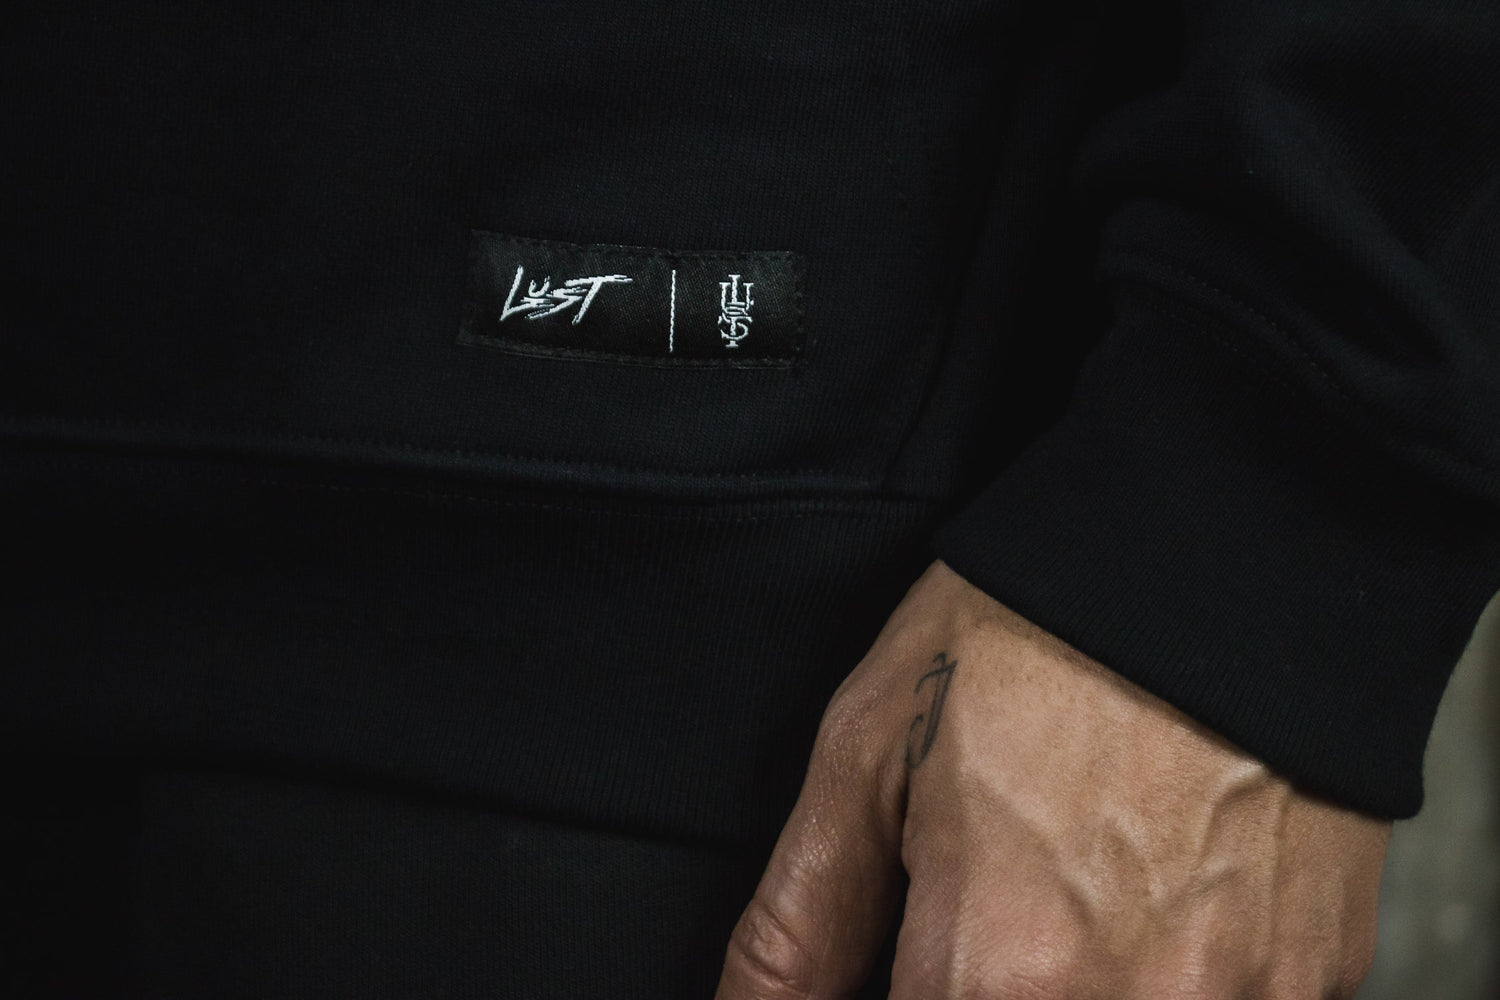 LUST BRAND AMAZED BY YOUR LUST HOODIE BLACK (6874321322050)